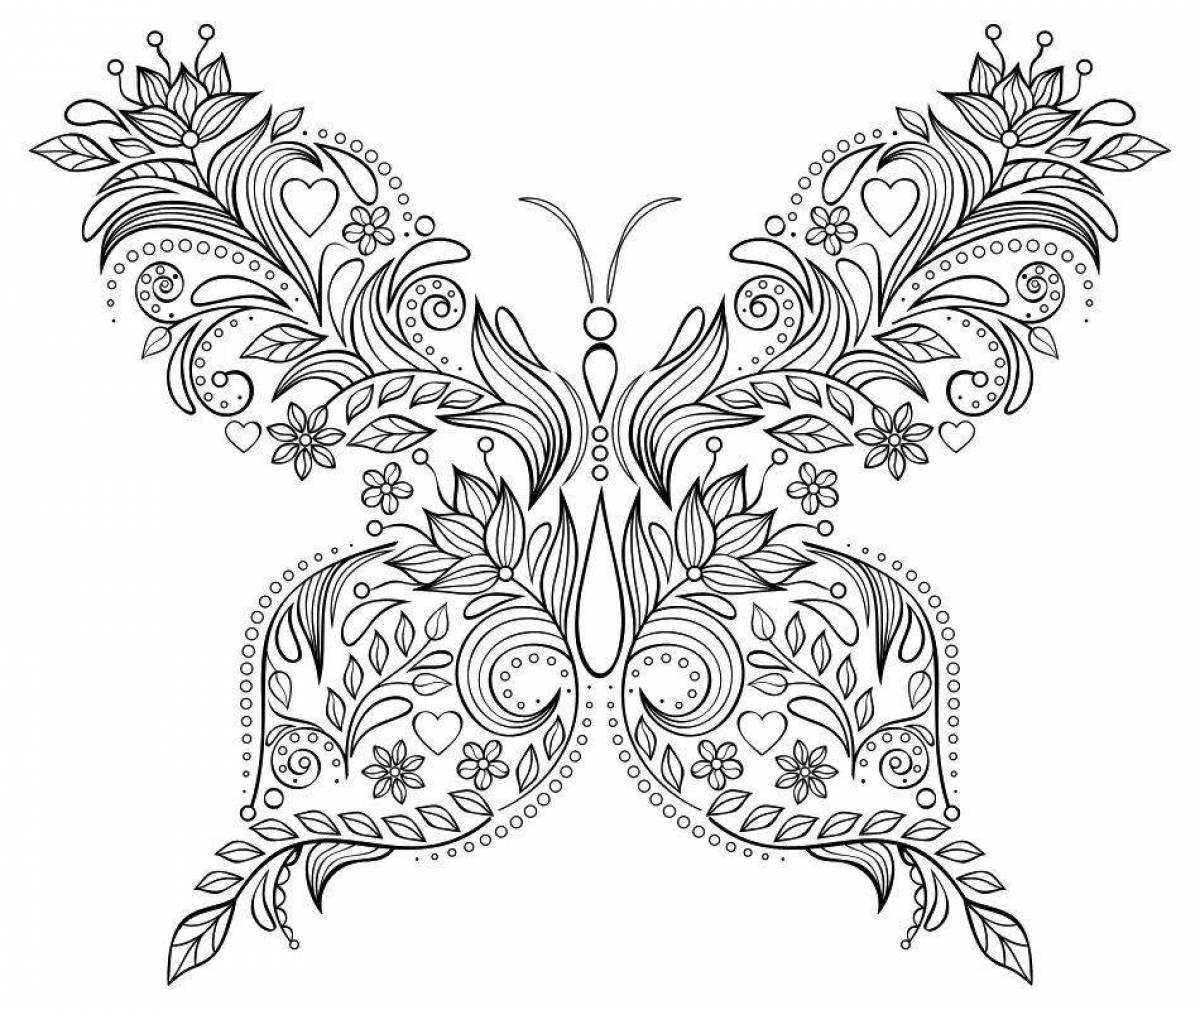 Coloring page with intricate pattern